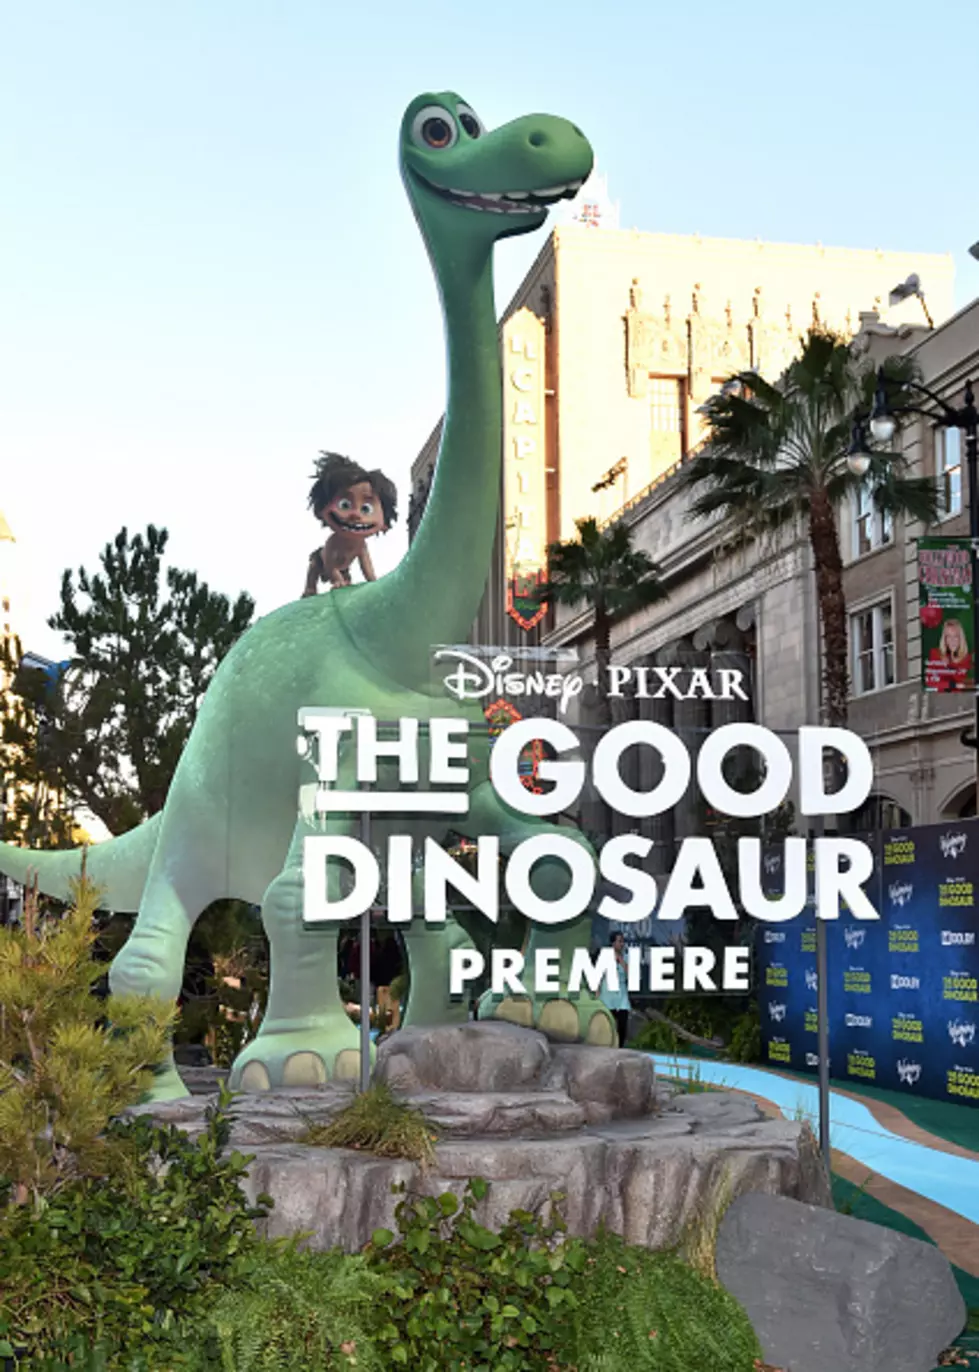 Wyoming’s “Good Dinosaur” Movie Finishes Second at the Box Office